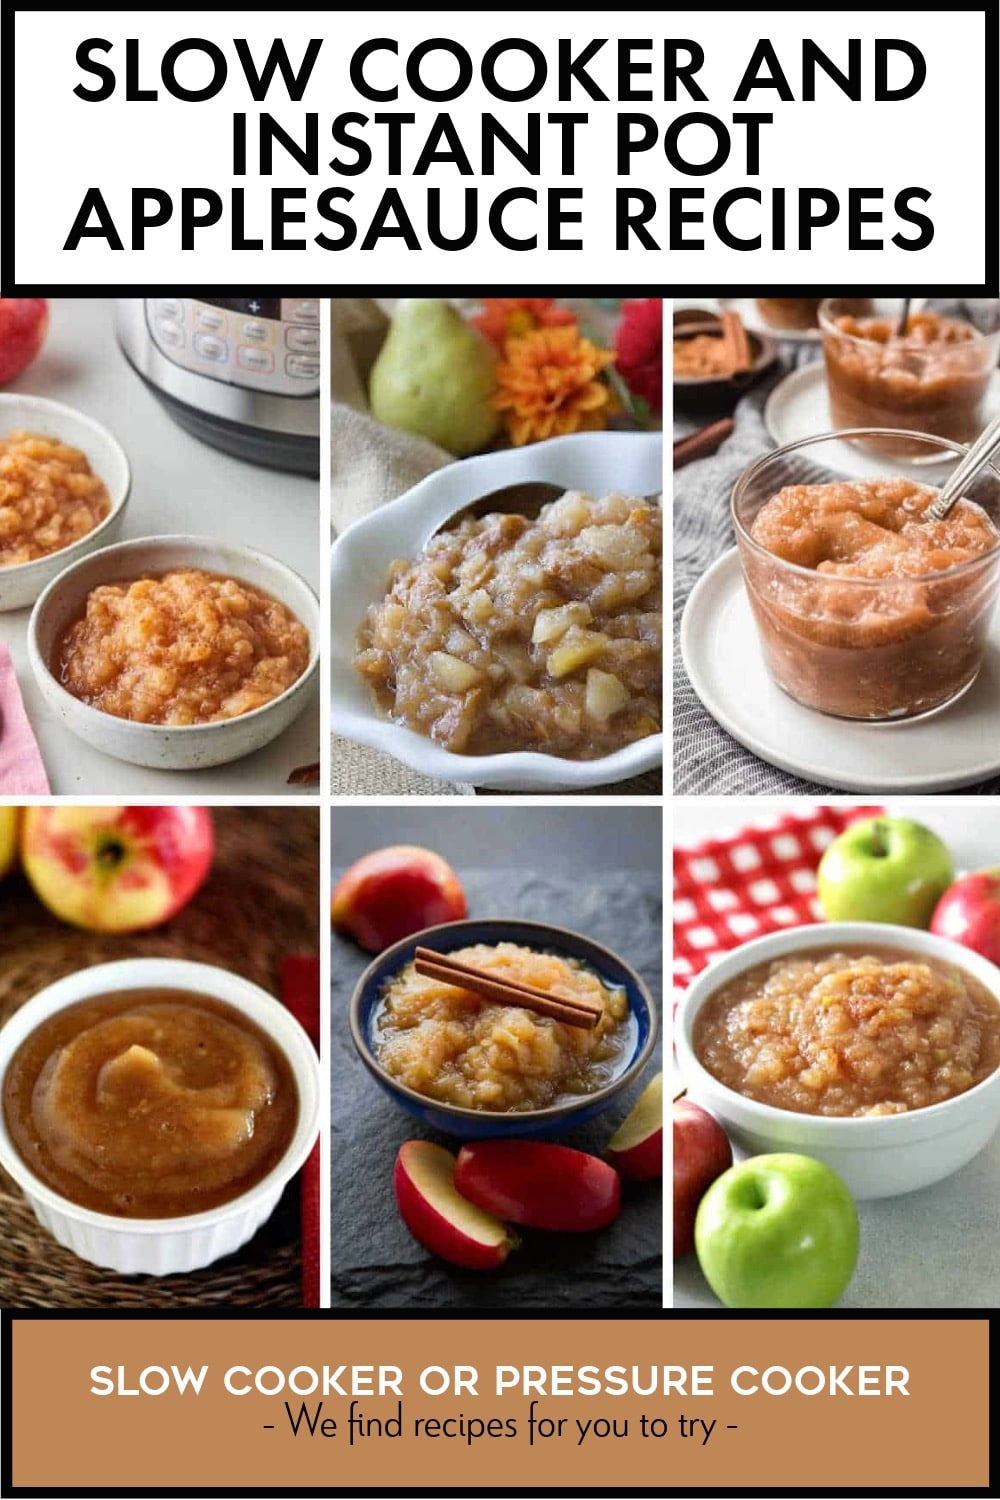 Pinterest image of Slow Cooker and Instant Pot Applesauce Recipes